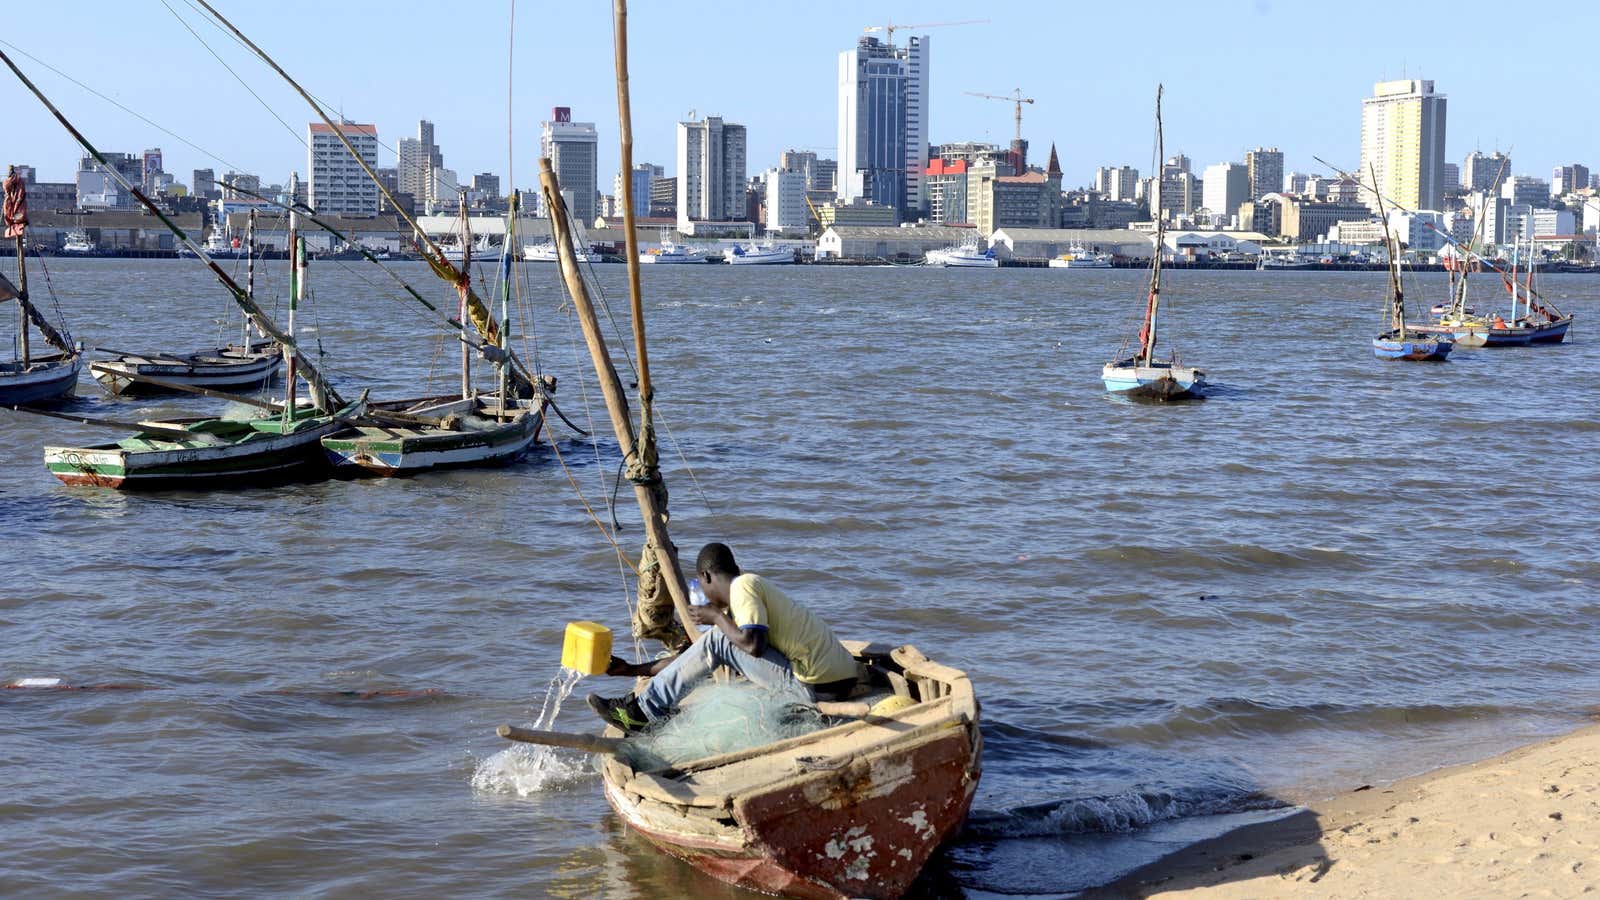 The effects of Mozambique’s hidden debt are beginning to show.